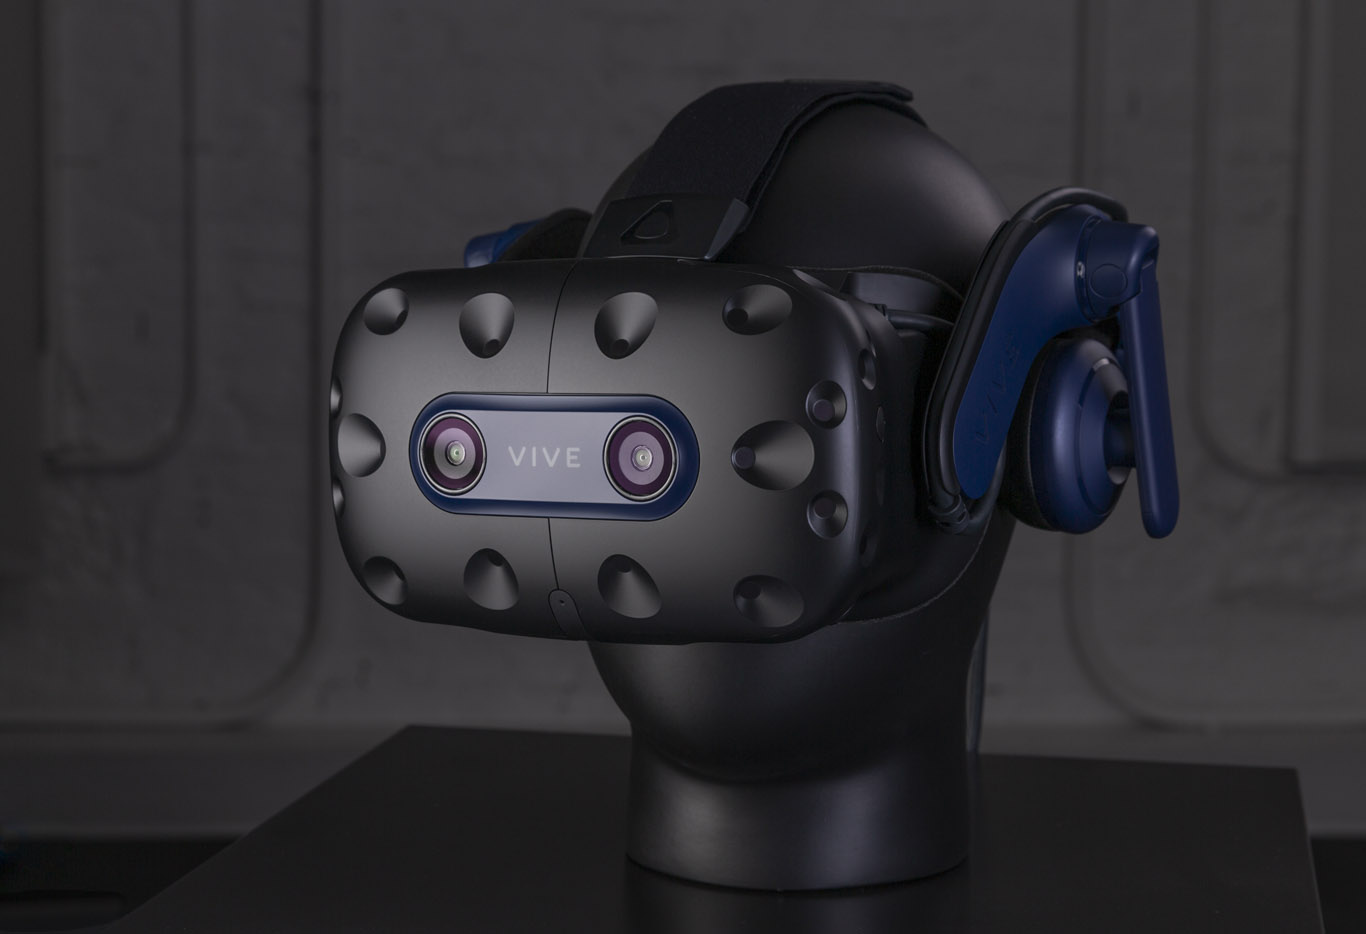 The XR Week Peek (2021.05.17): HTC announces Vive Pro 2 and Vive Focus 3, PSVR 2 to feature eye tracking, and more!